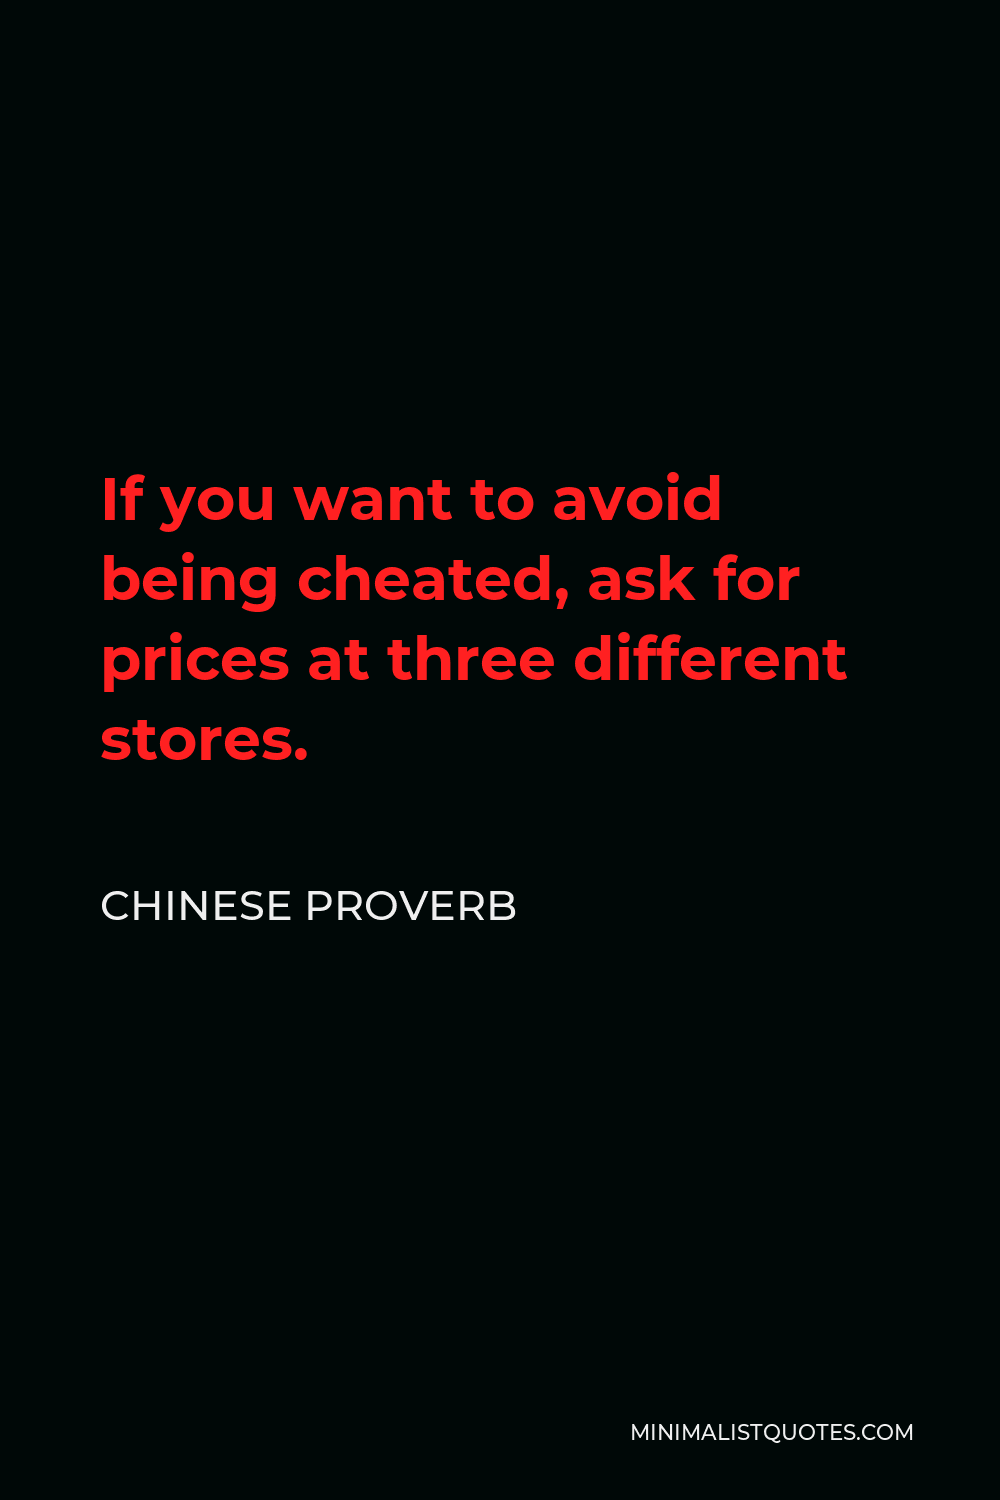 Chinese Proverb Quote - If you want to avoid being cheated, ask for prices at three different stores.